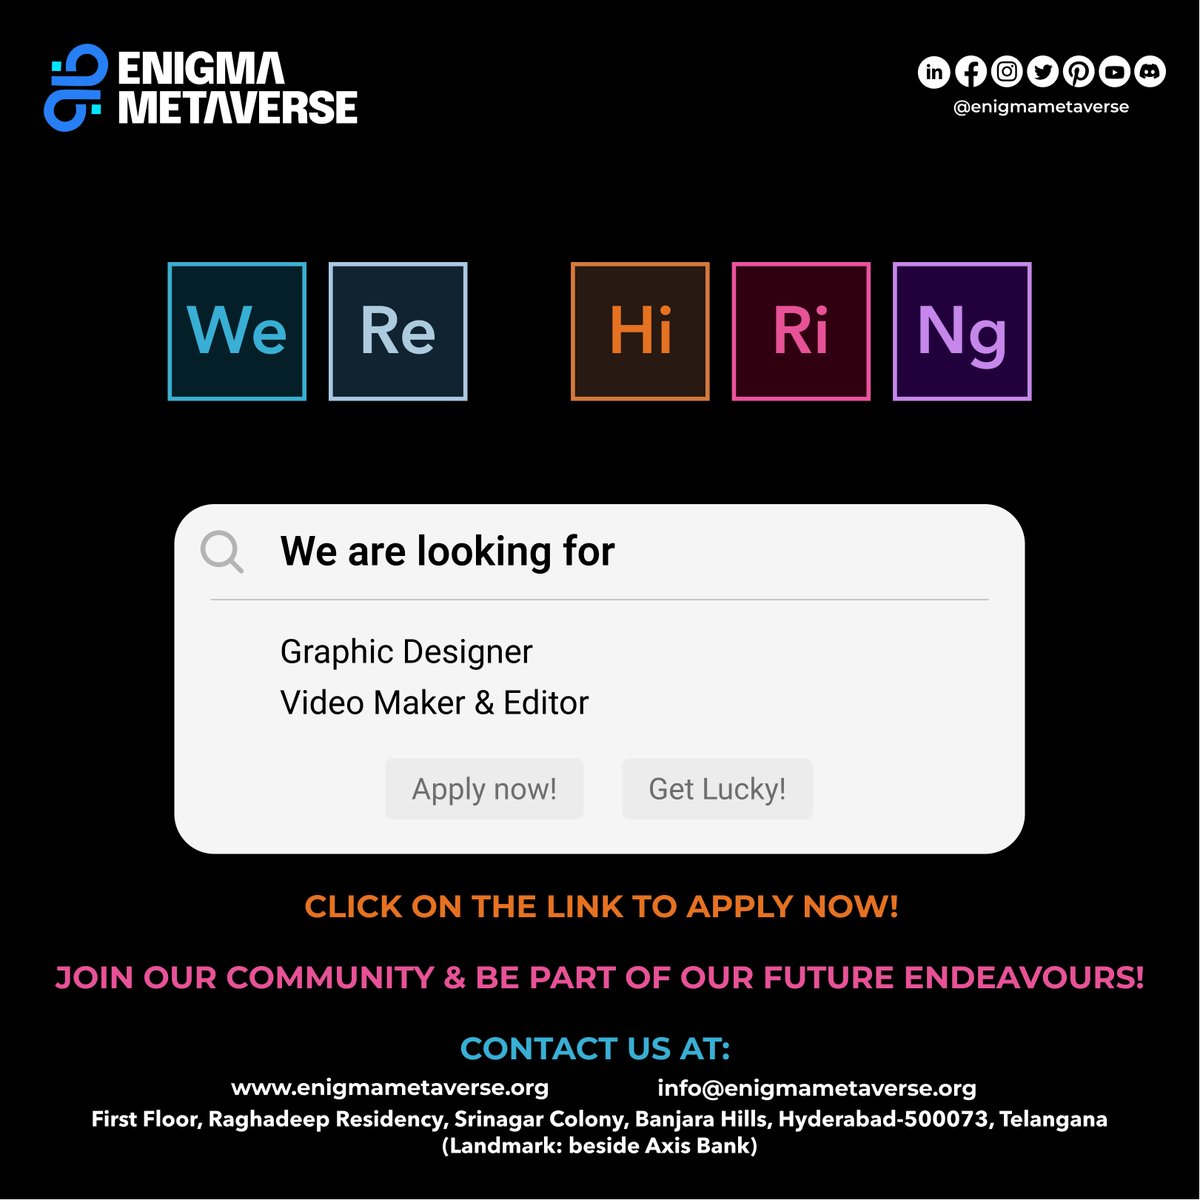 Looking for a #graphicdesign or #videoediting #videomaking job?
WE'RE HIRING!
Apply using link below! 👇👇👇

forms.office.com/r/M7TUZ7uHw8

Join our Enigma Family where we learn and grow together!

#hiring #jobs #jobsearch #recruitment #job #nowhiring #recruiting #career #employment